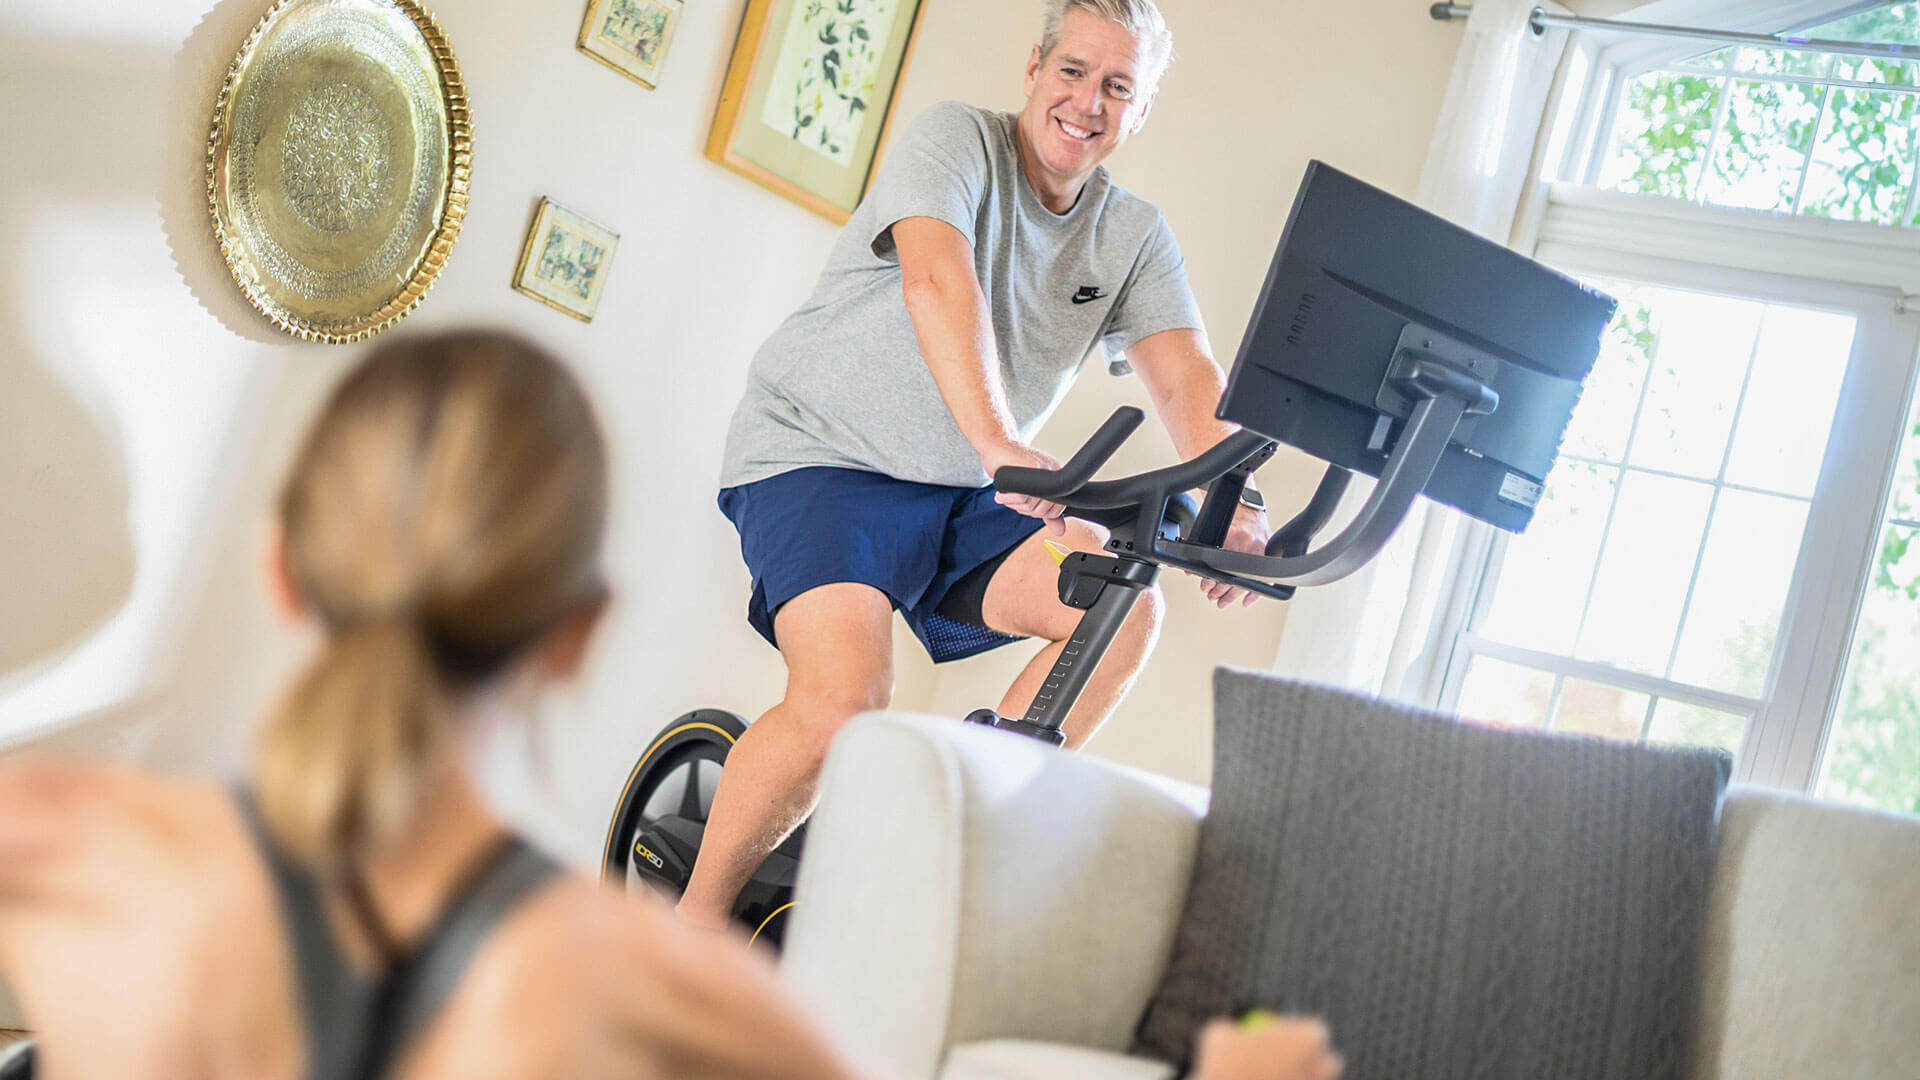 Man using Matrix upright bike with woman working out in foreground